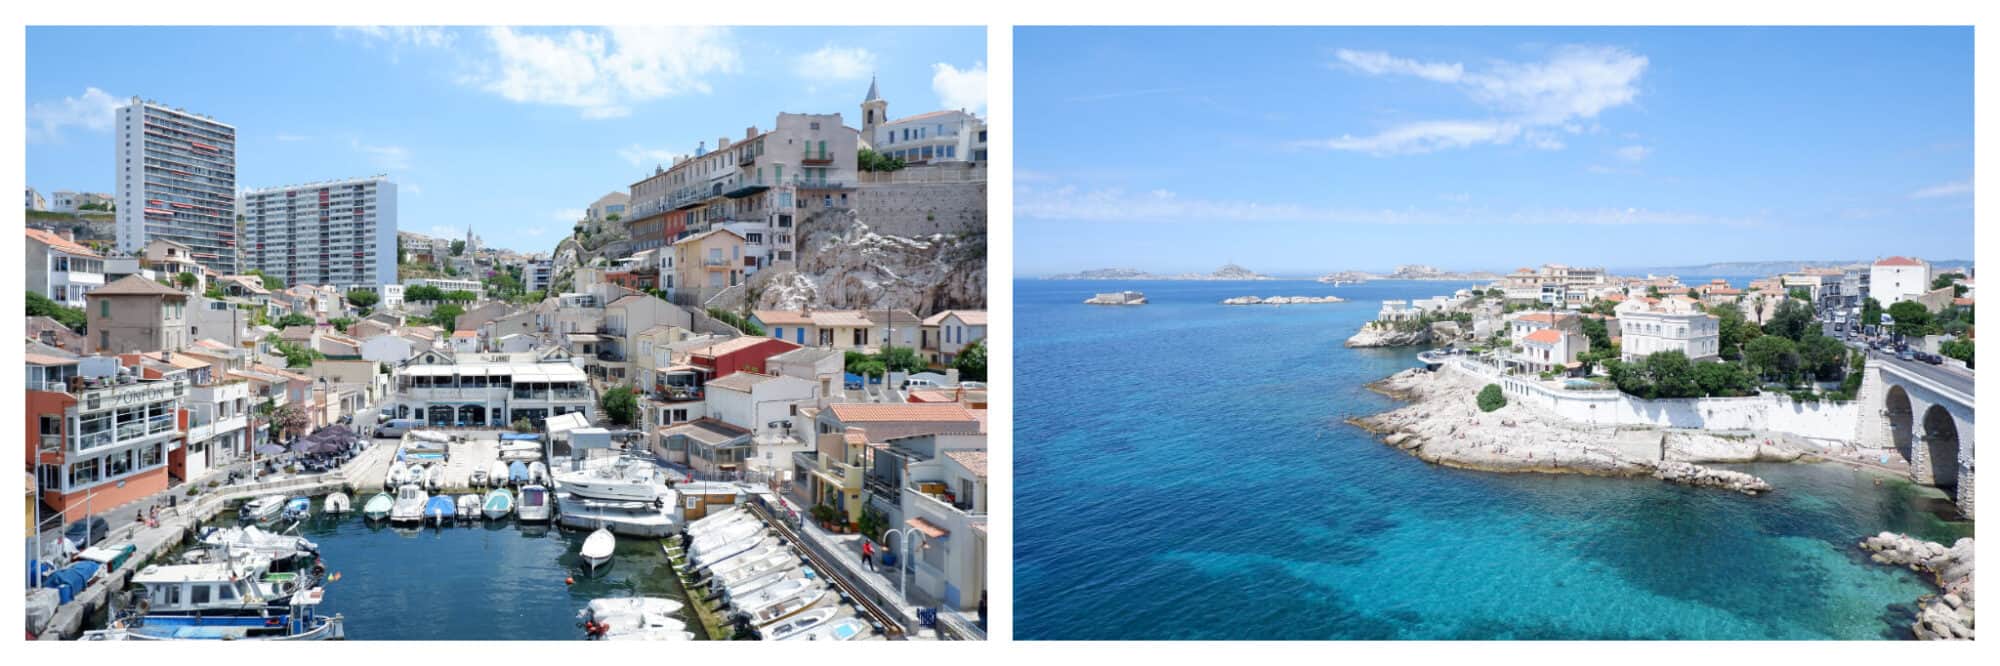 Left: A crowded port in Marseille 
Right: The crystal blue Mediterranean Sea near Marseille on a sunny day. 